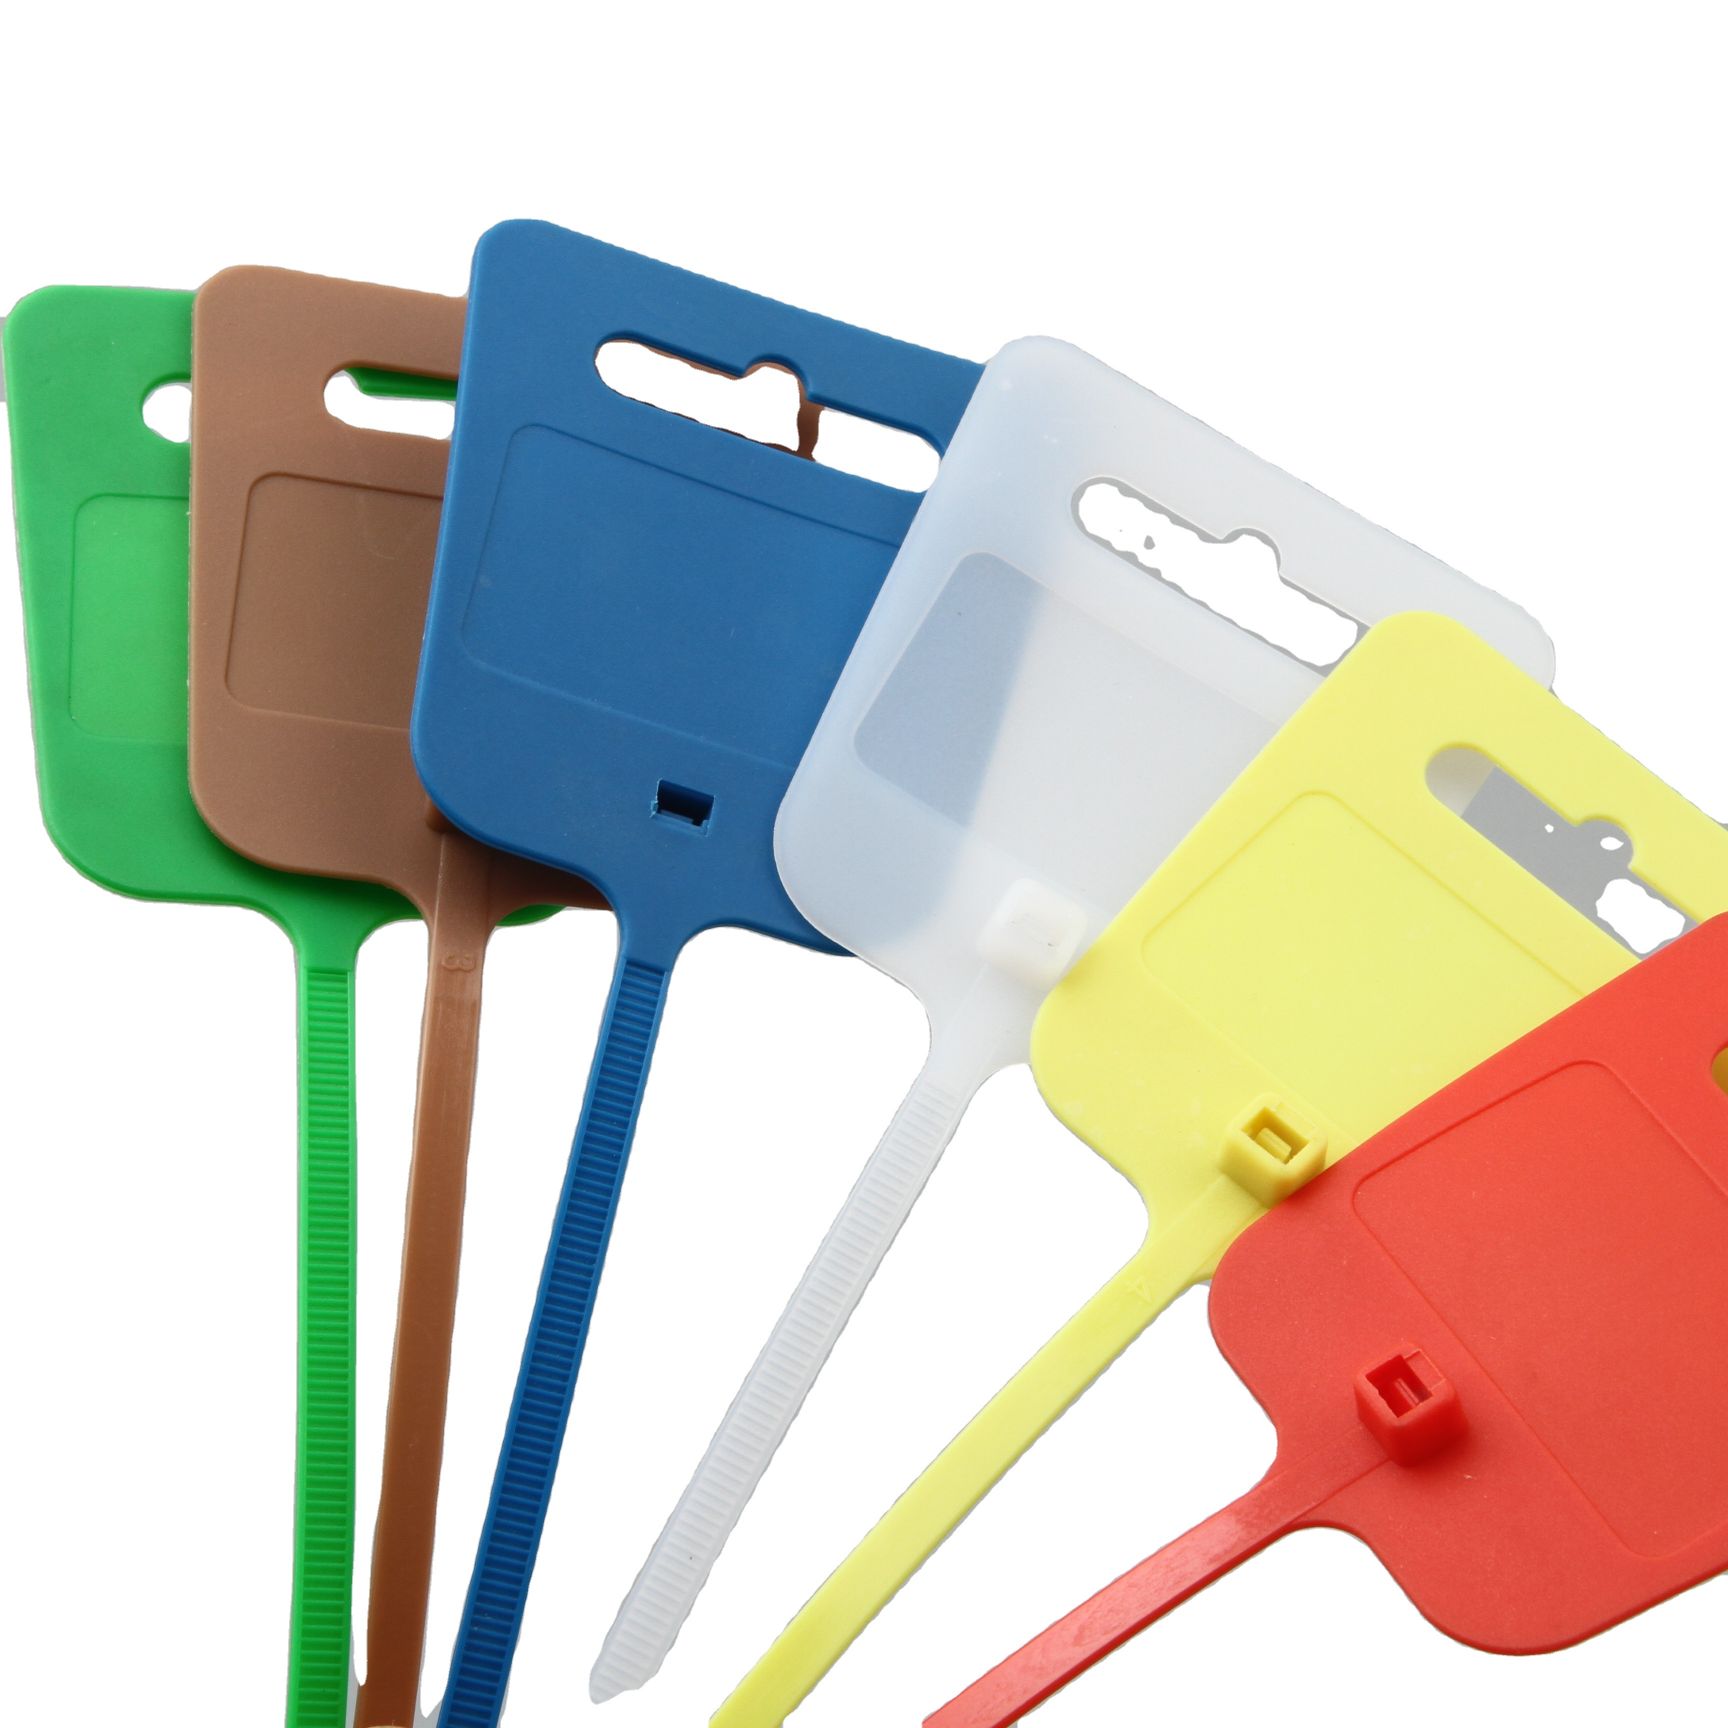 Weather resistant nylon cable ties